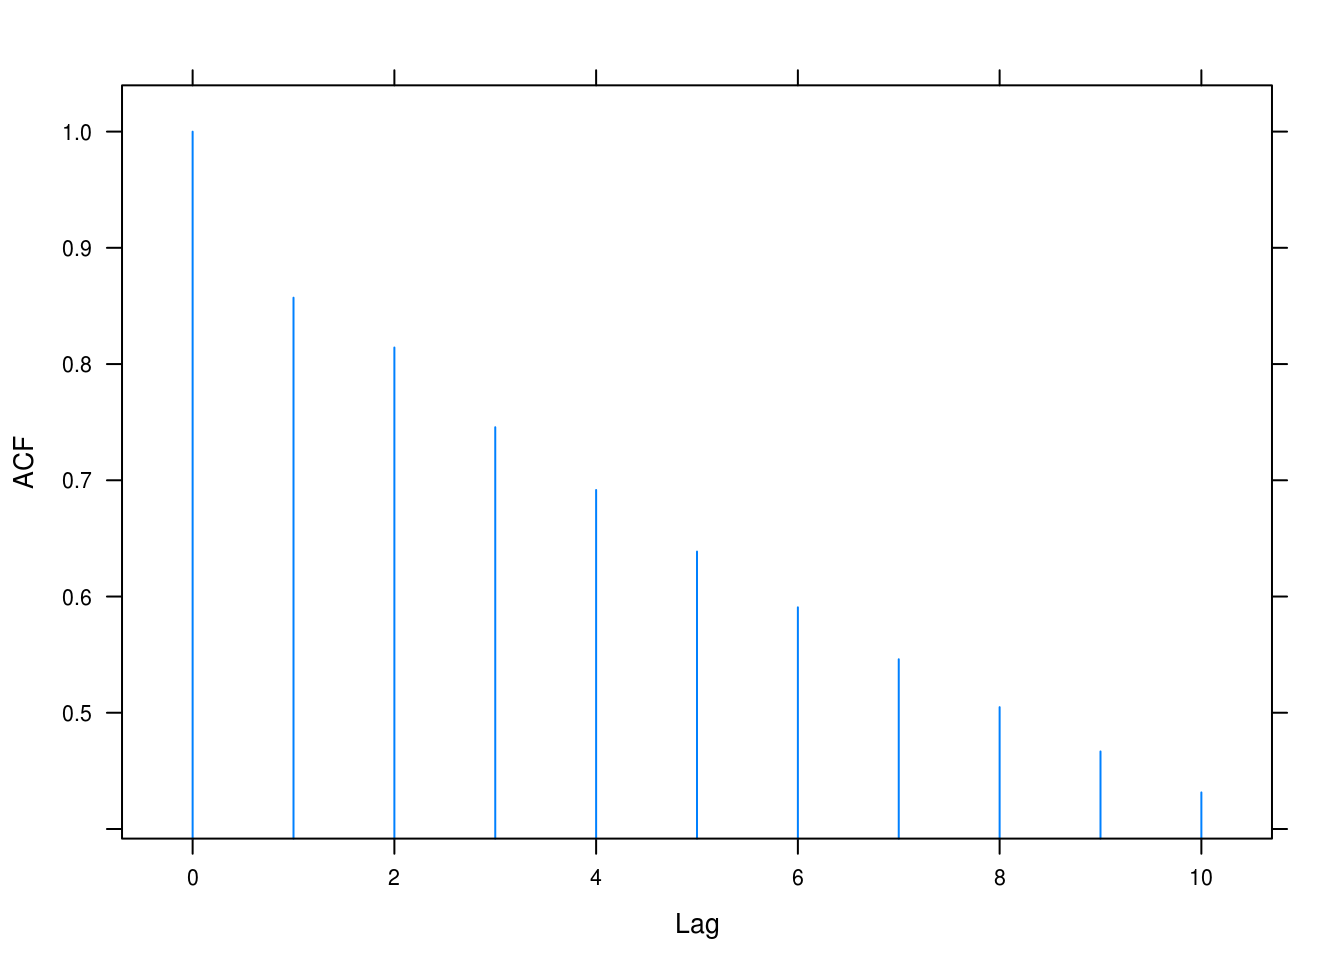 ACF for AR(2) with $\phi_1 = 0.6, \phi_2 = 0.3$.